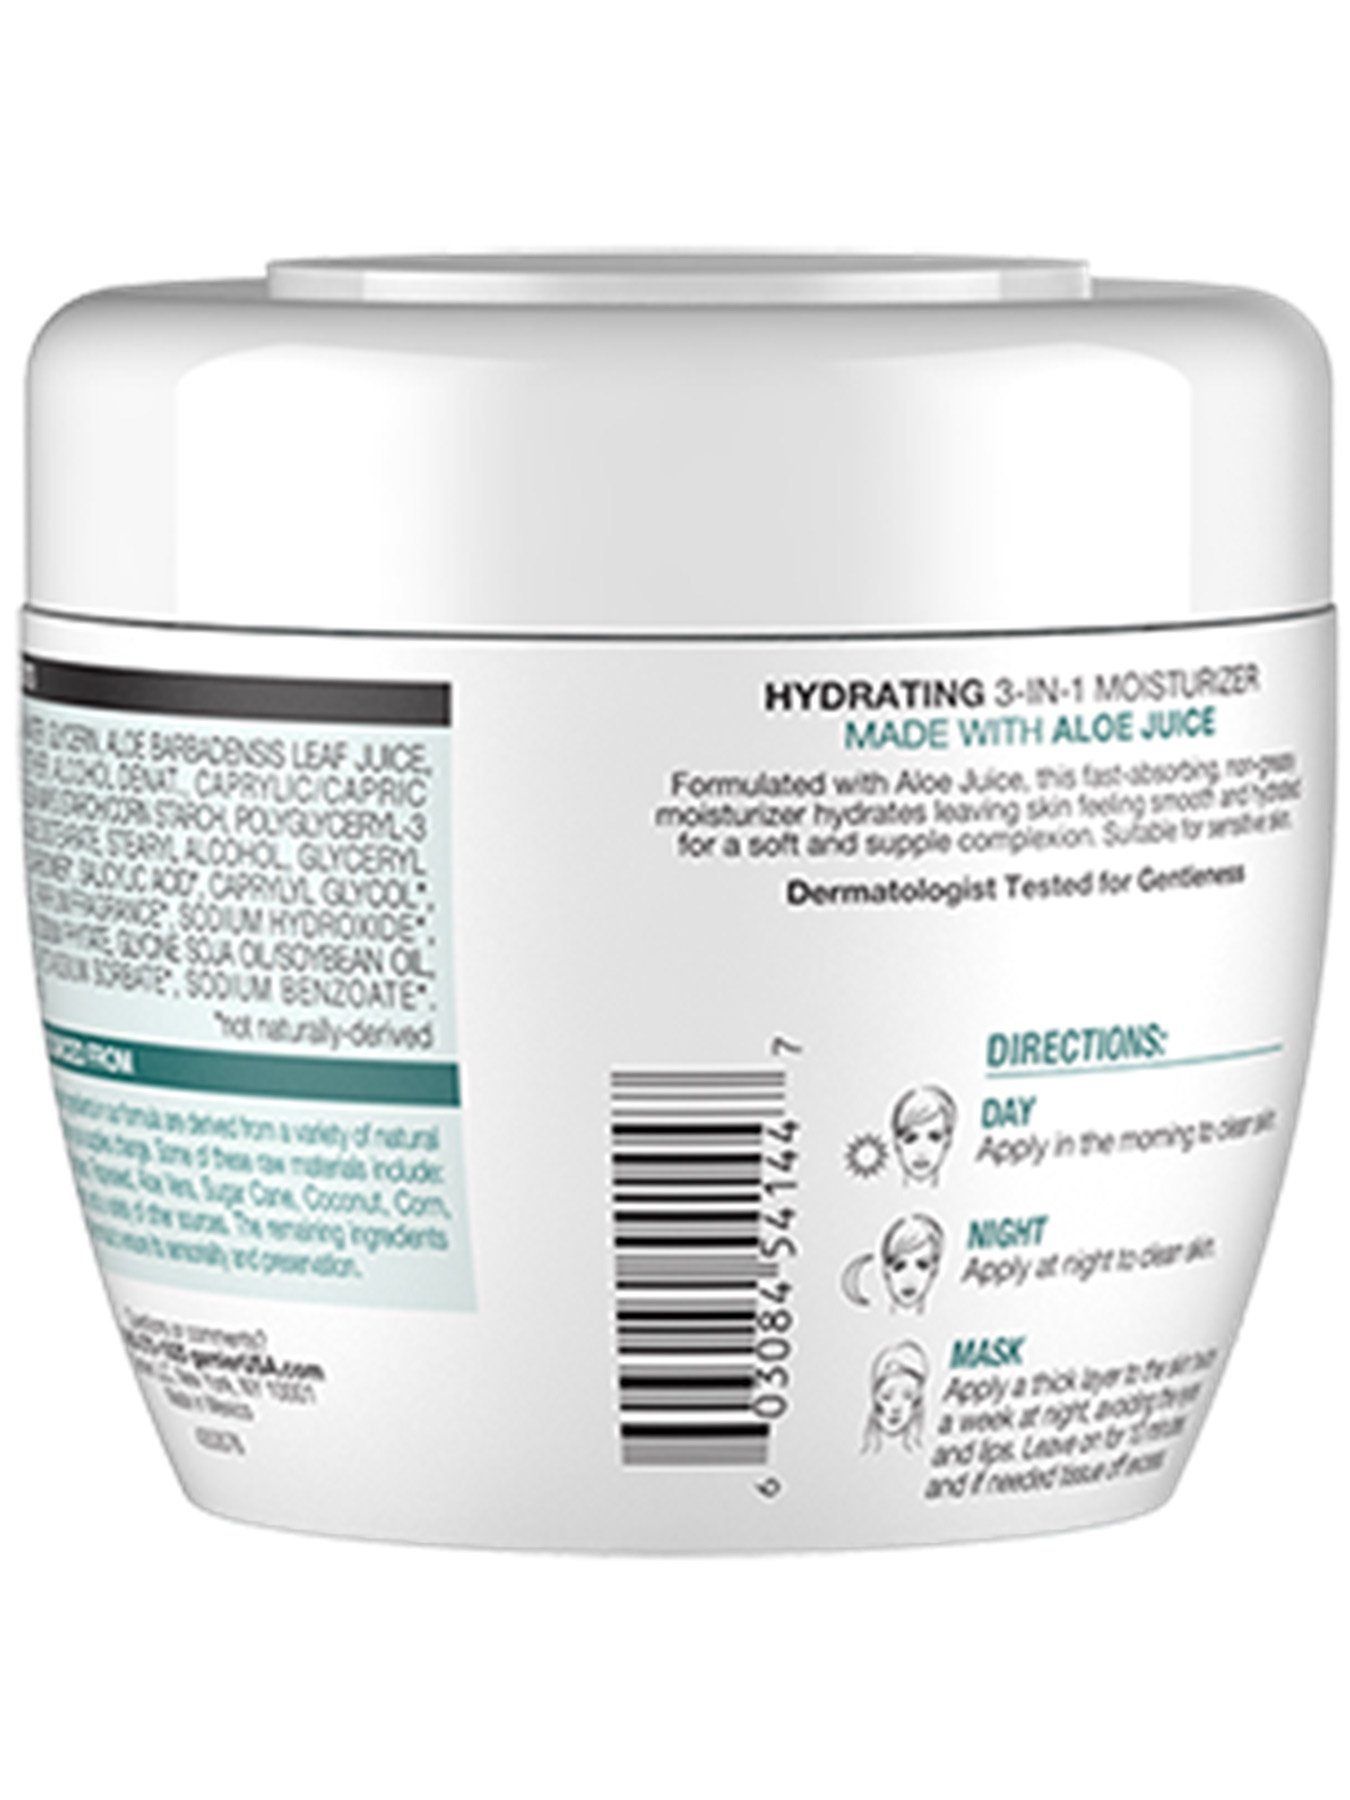 Back view of Garnier SkinActive Hydrating 3-in-1 Face Moisturizer with Aloe.